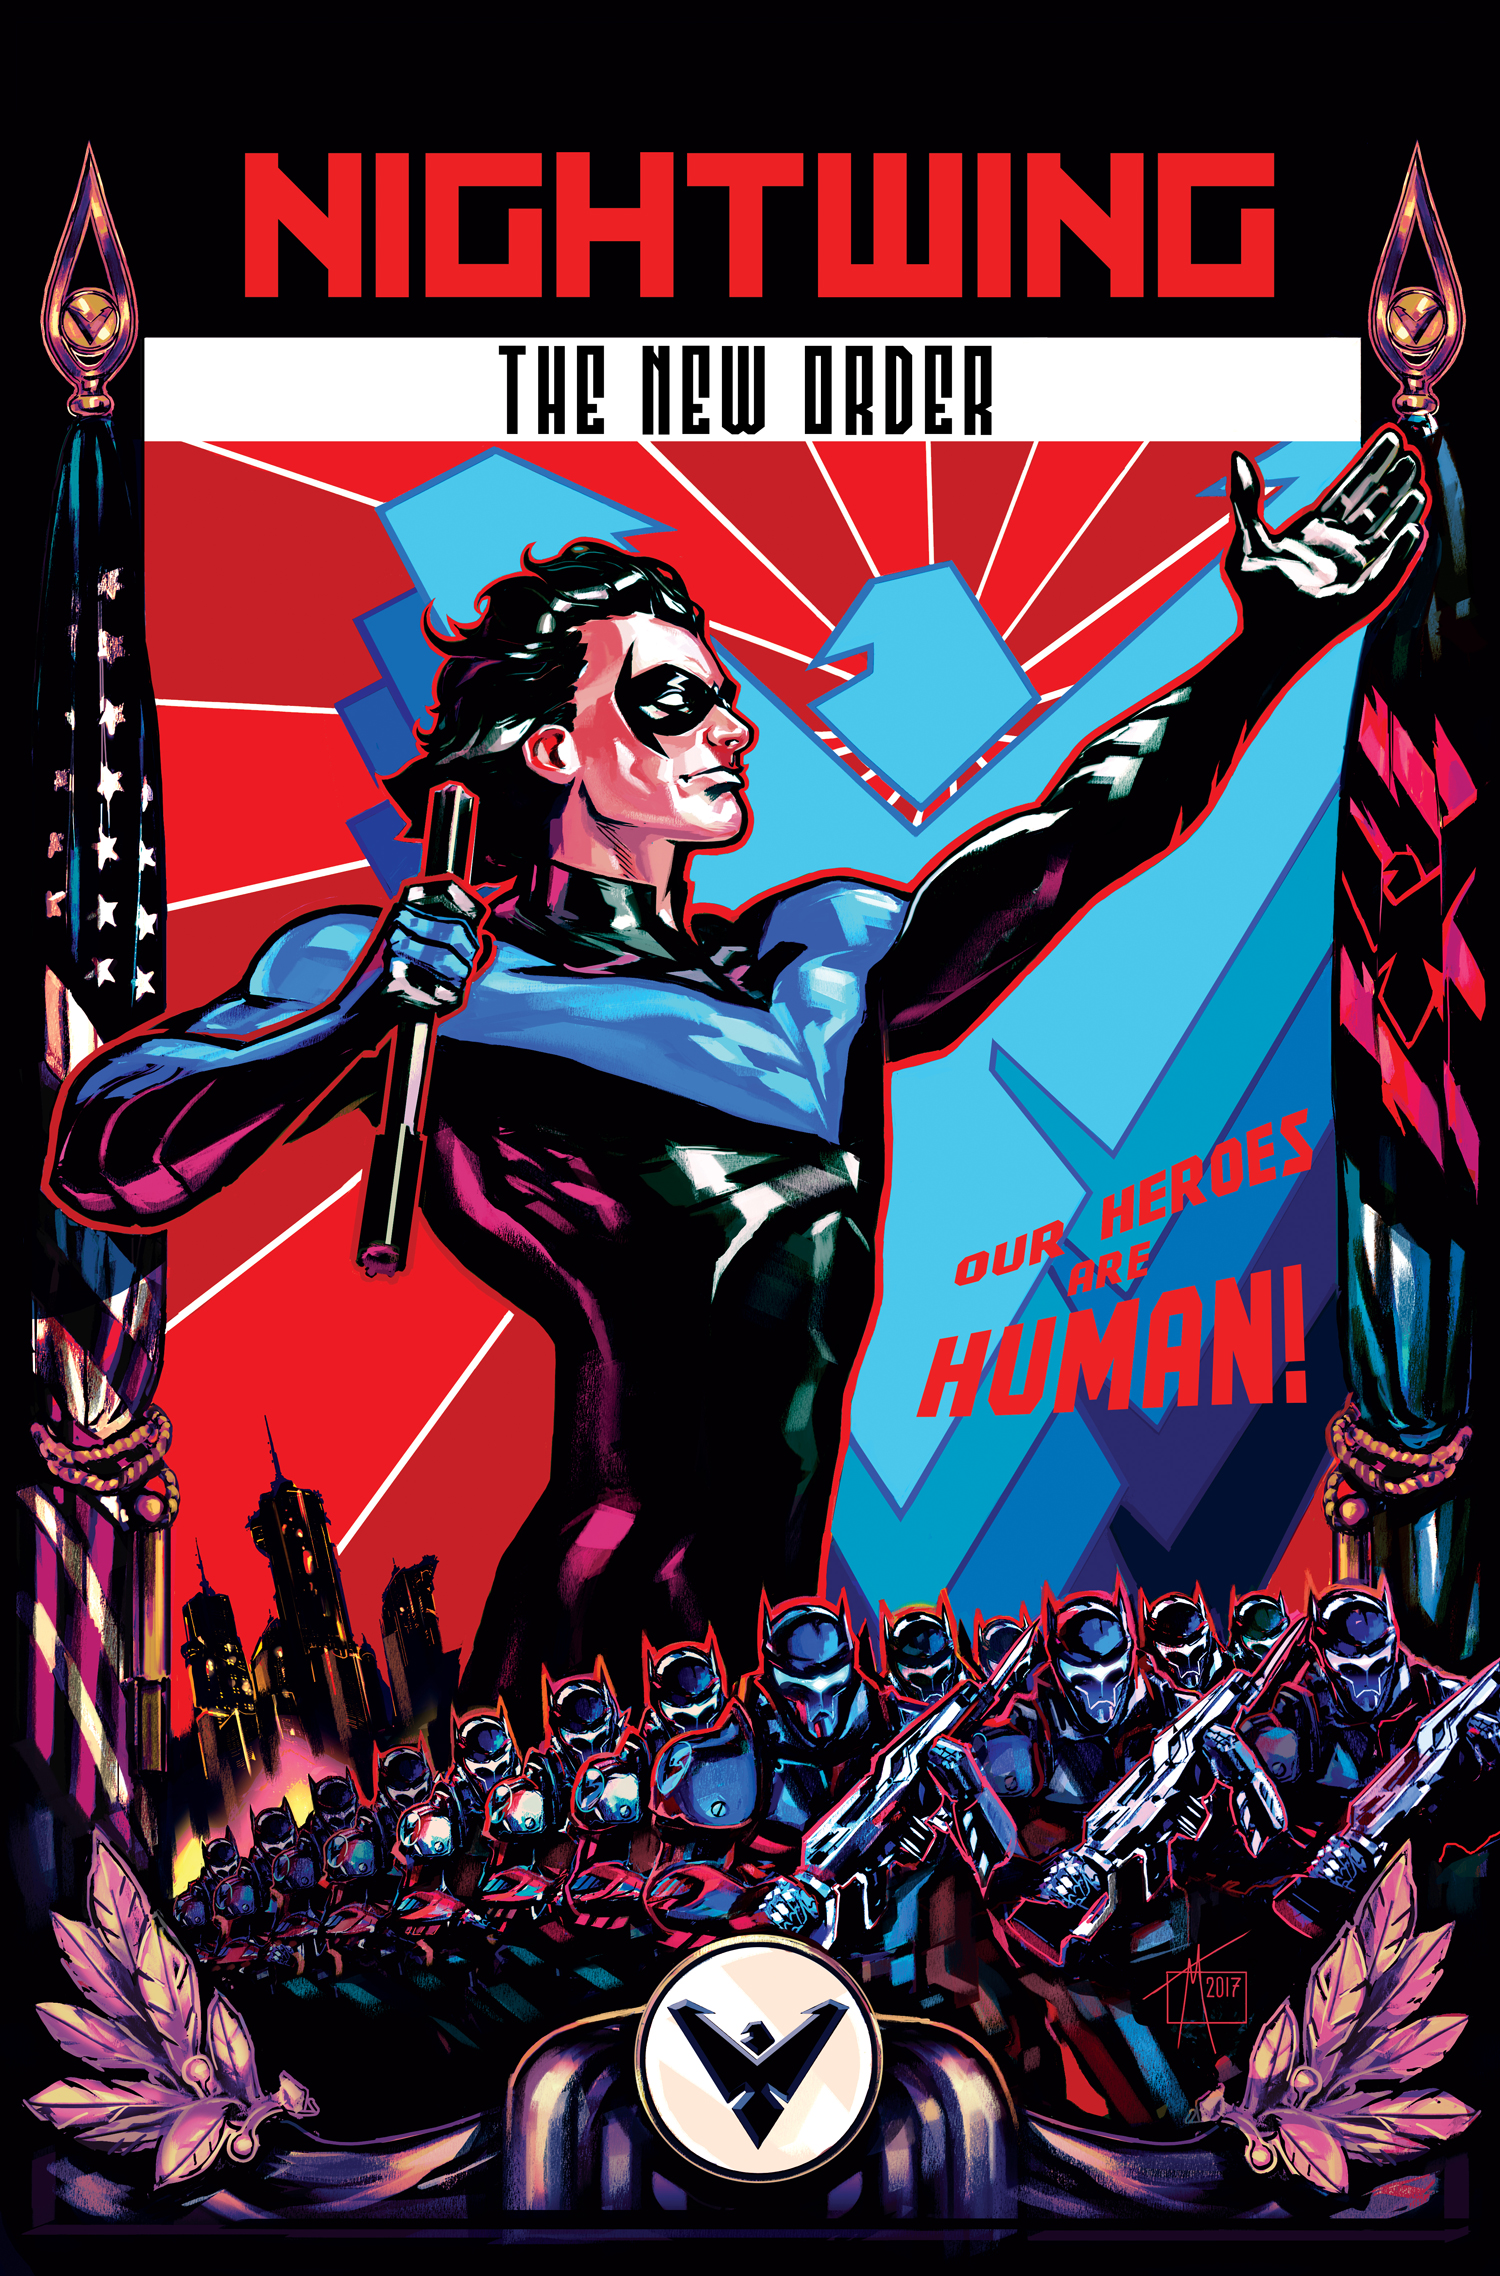 'The New Order' coming soon from DC Comics